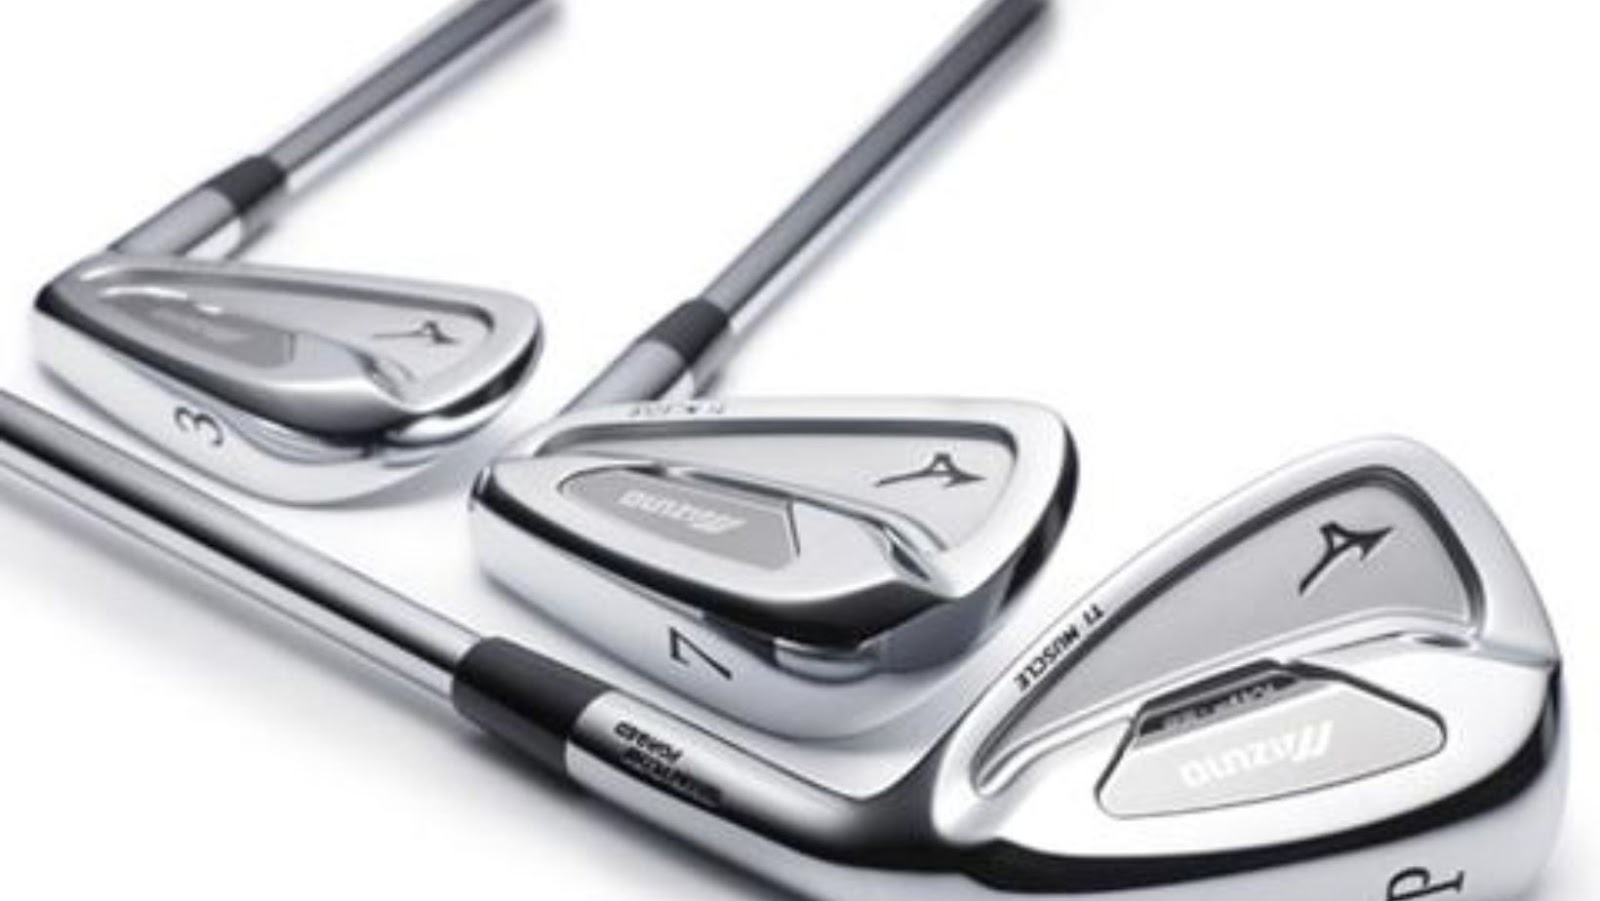 TaylorMade R11s Irons and Golf Analyzer: Pros and Cons